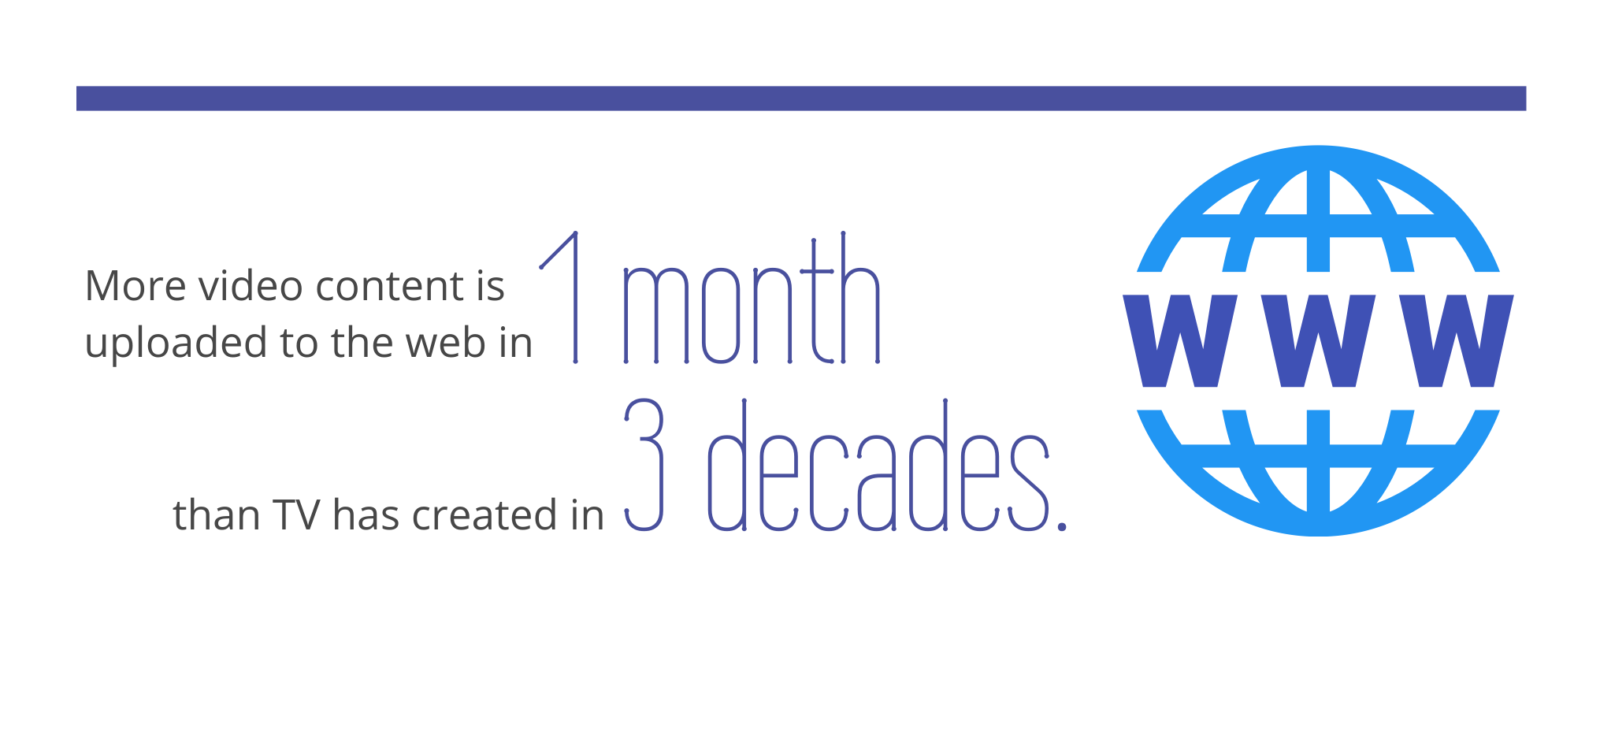 More video content is uploaded to the web in 1 month than TV has created in 3 decades.